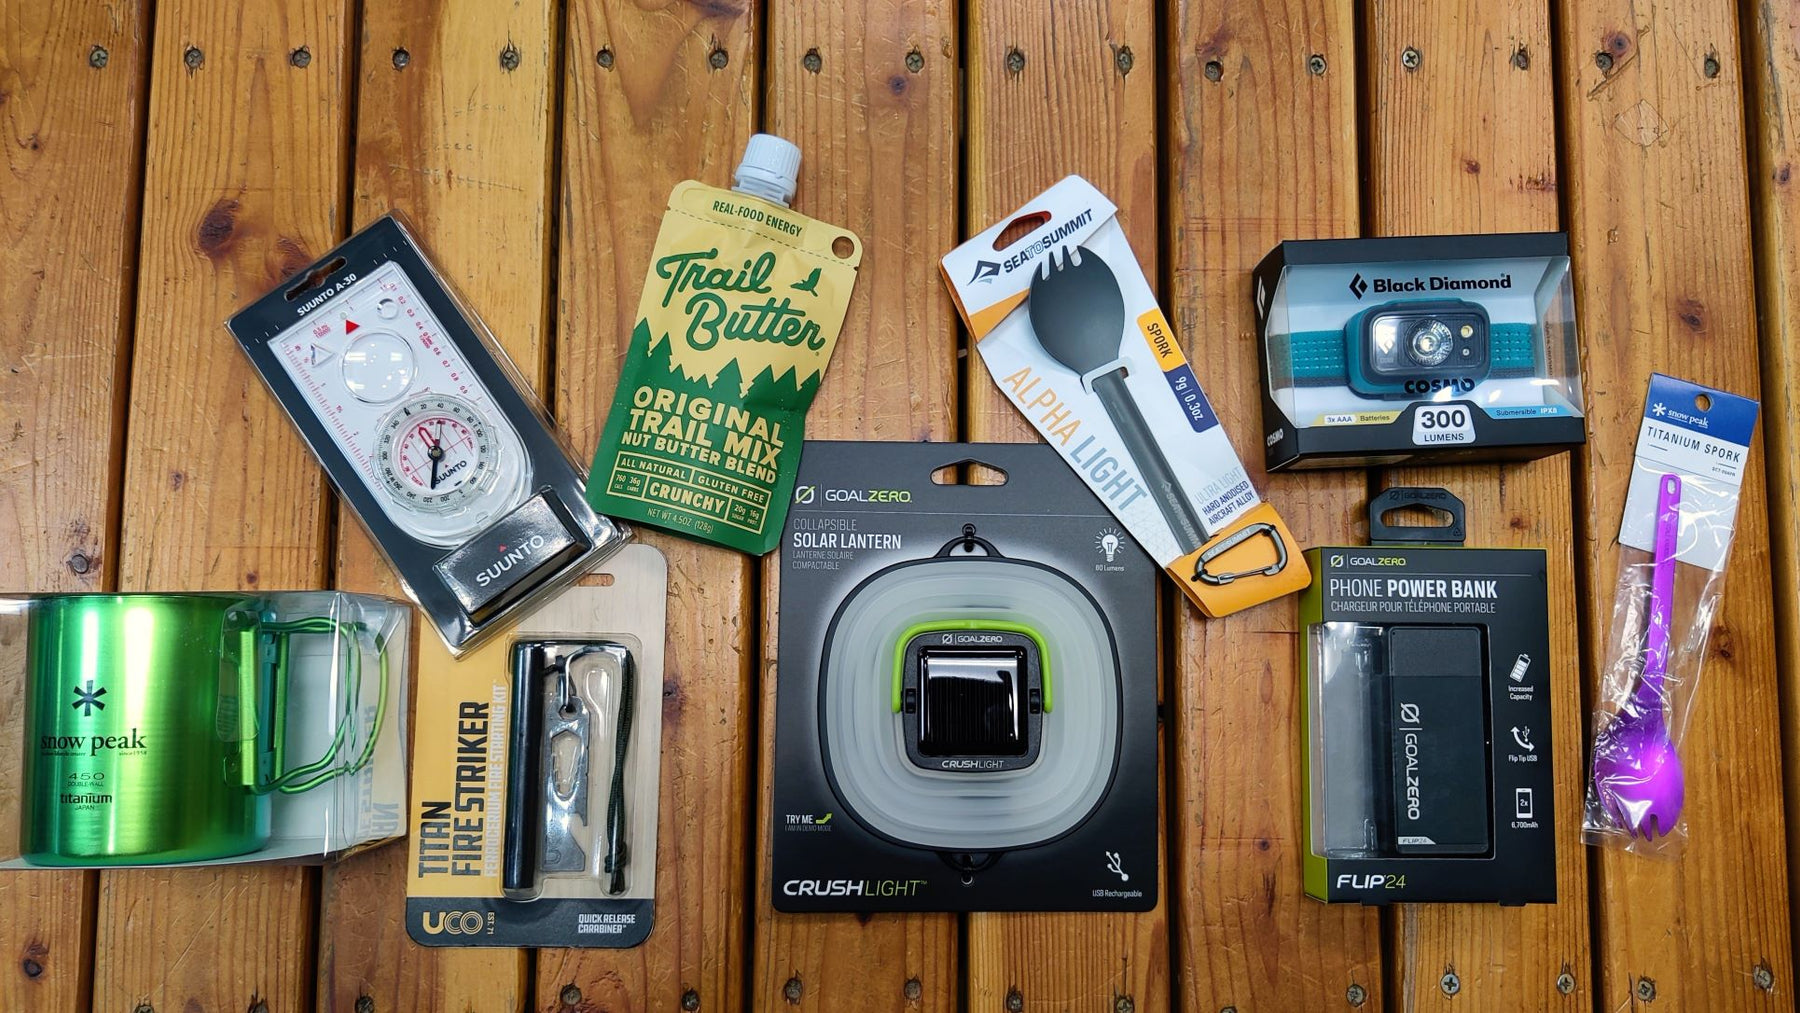 Stocking stuffers for hikers and campers